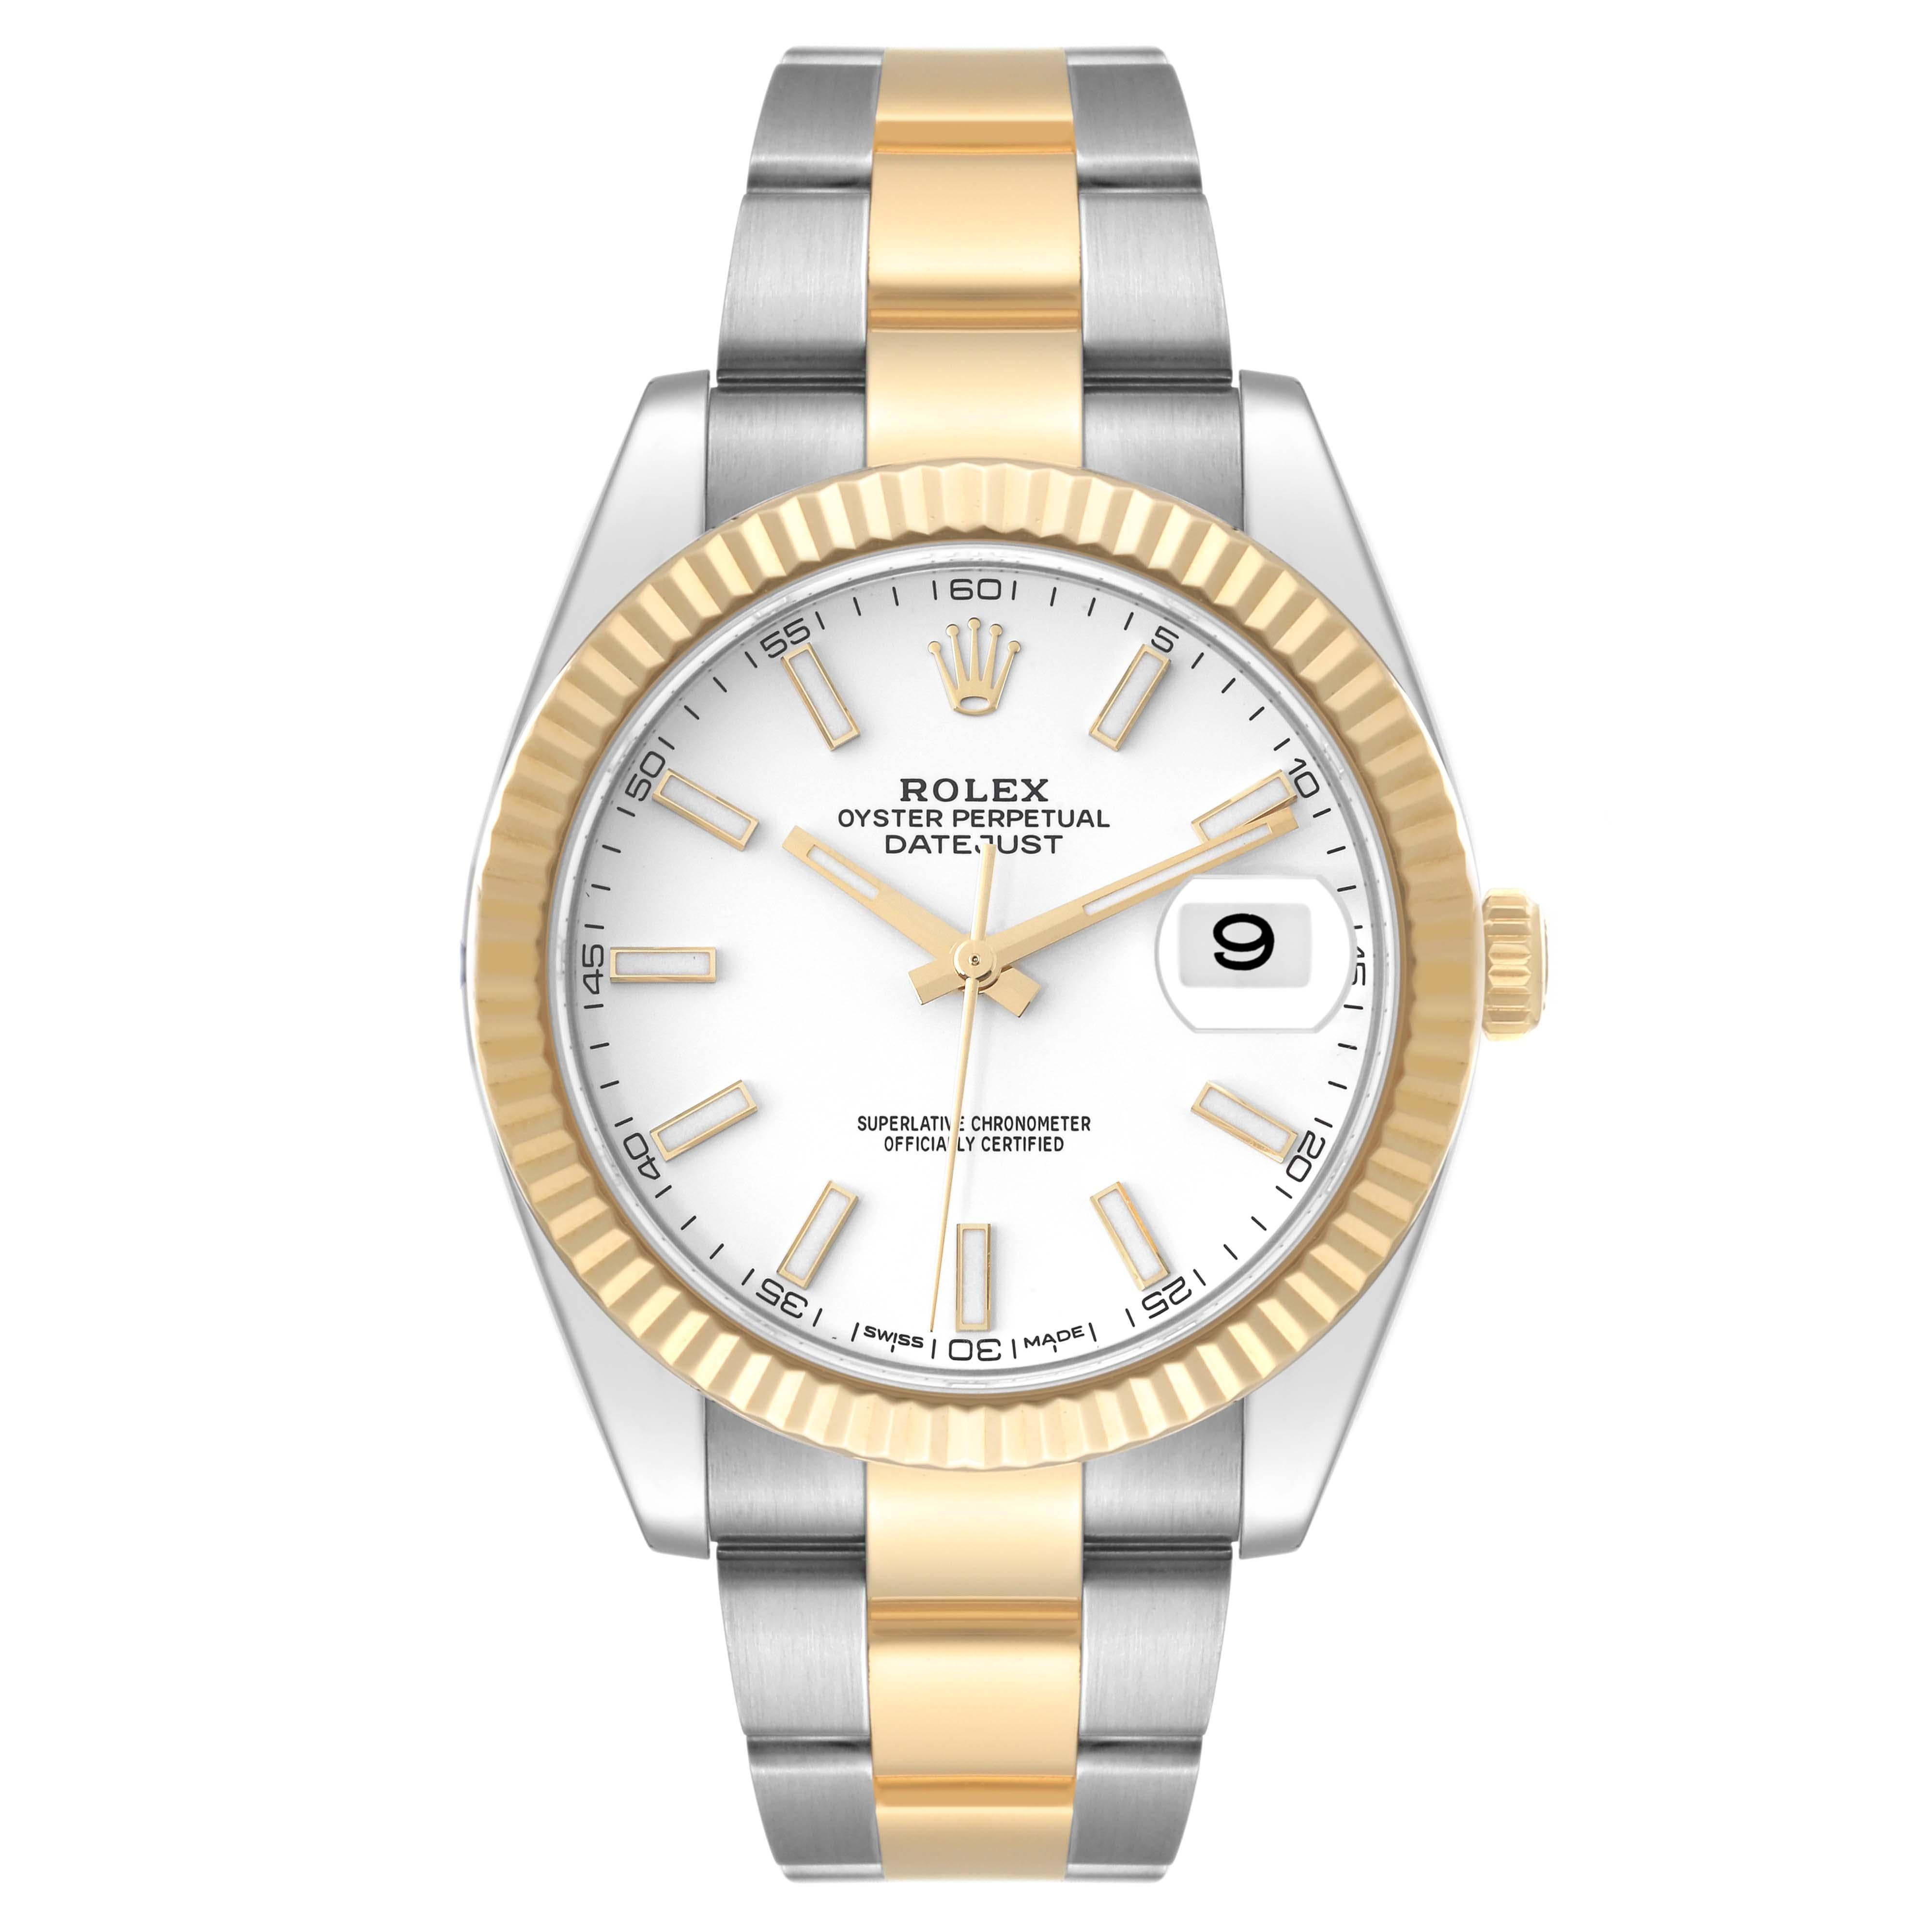 Rolex Datejust 41 Steel Yellow Gold White Dial Mens Watch 126333 Box Card. Officially certified chronometer automatic self-winding movement. Stainless steel and 18K yellow gold case 41.0 mm in diameter.  High polished lugs. Rolex logo on a crown.